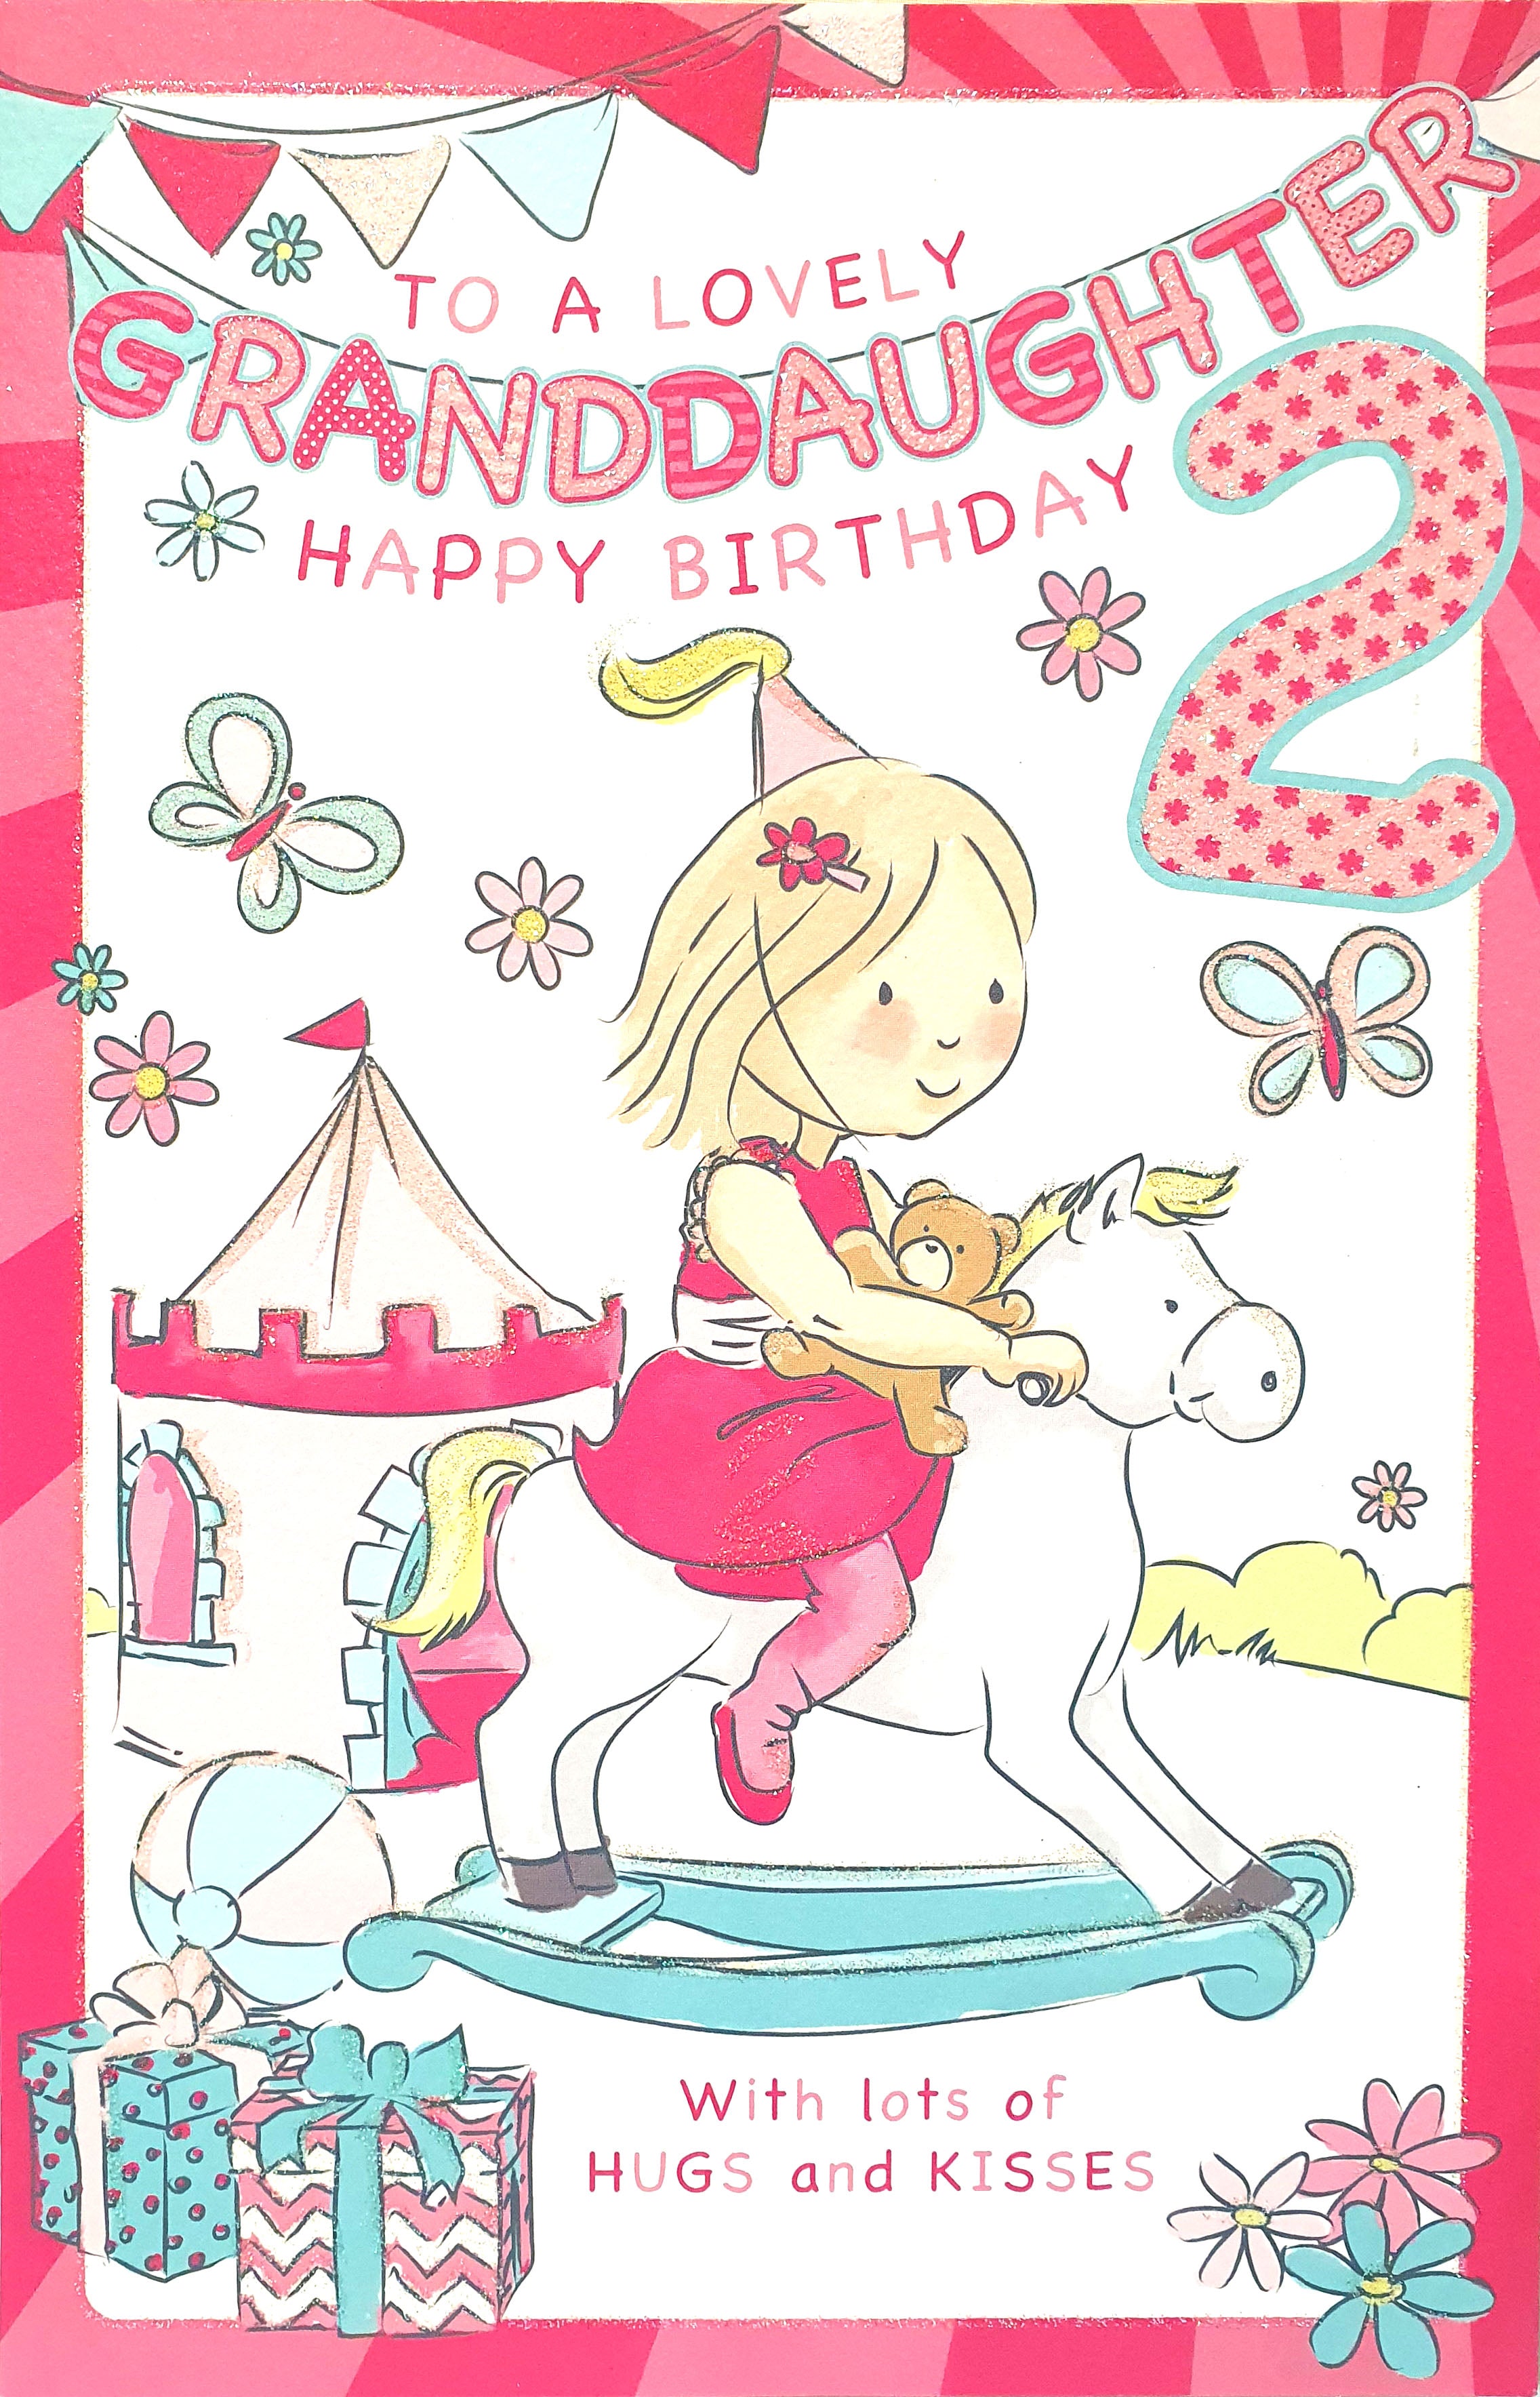 Granddaughter 2nd Birthday Card - Large Quality Card Colour Me In Activity Lovely